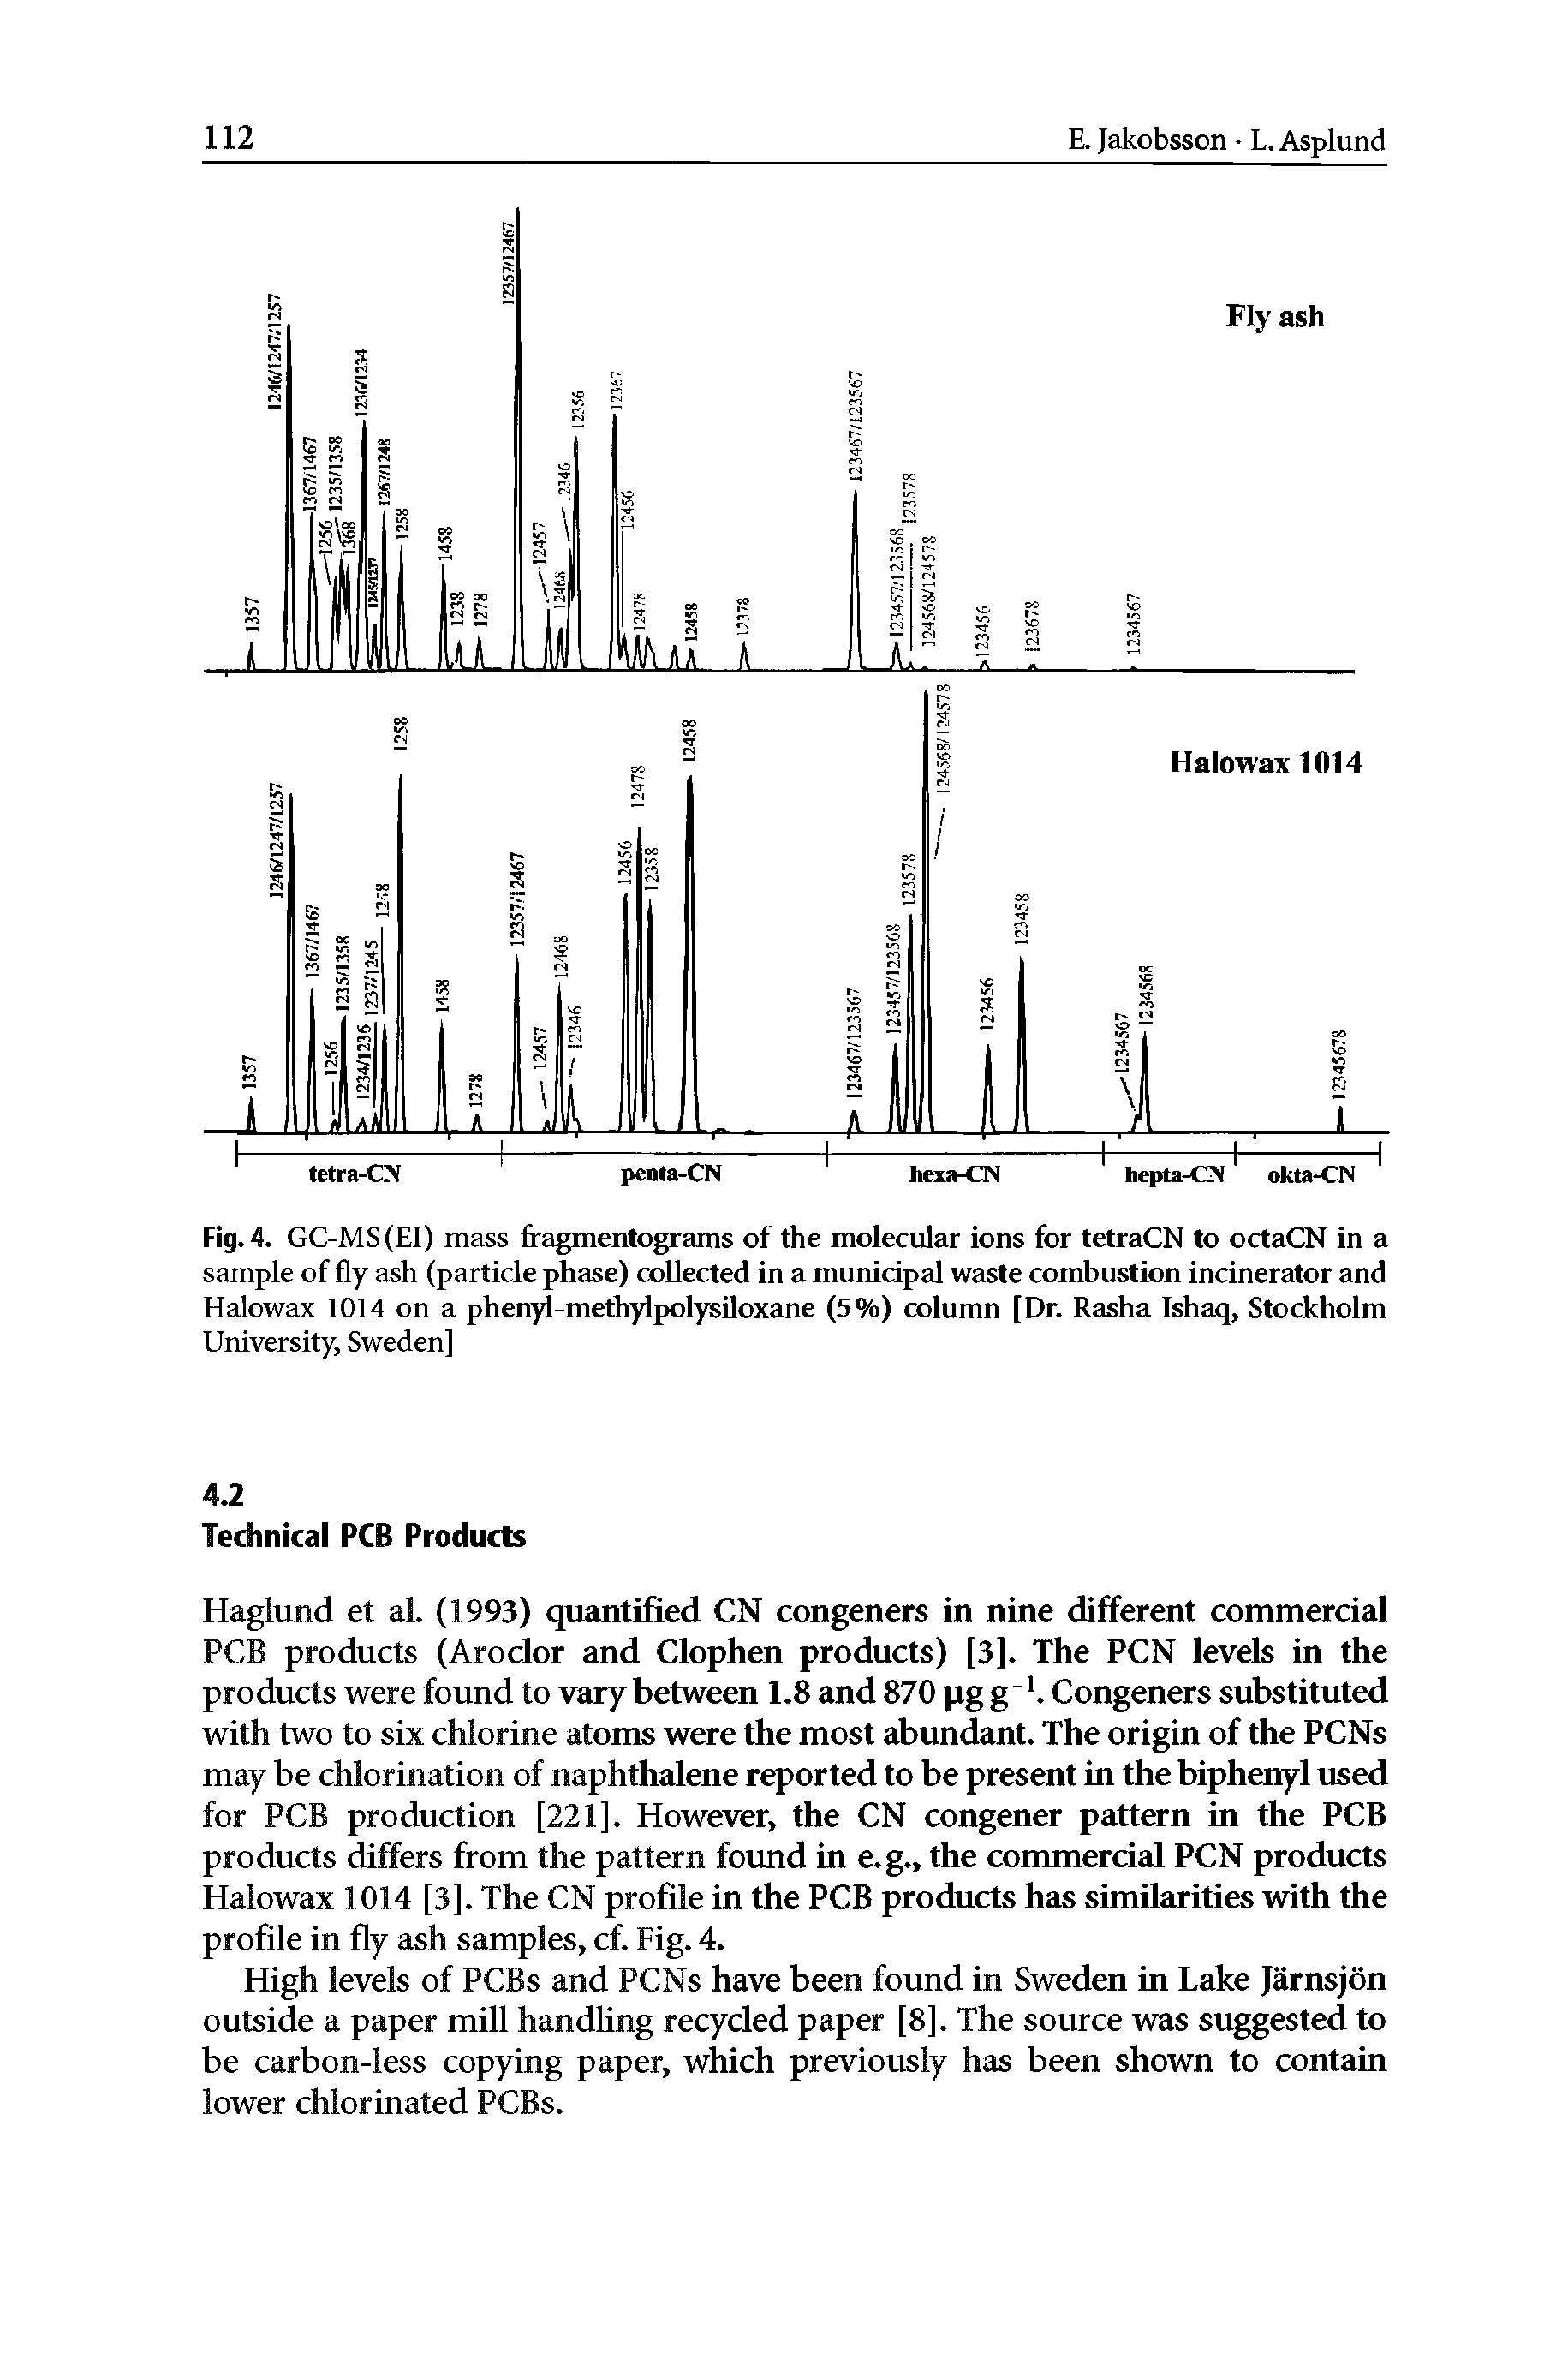 Fig. 4. GC-MS(EI) mass fragmentograms of the molecular ions for tetraCN to octaCN in a sample of fly ash (particle phase) collected in a municipal waste combustion incinerator and Halowax 1014 on a phenyl-methylpolysiloxane (5%) column [Dr. Rasha Ishaq, Stockholm...